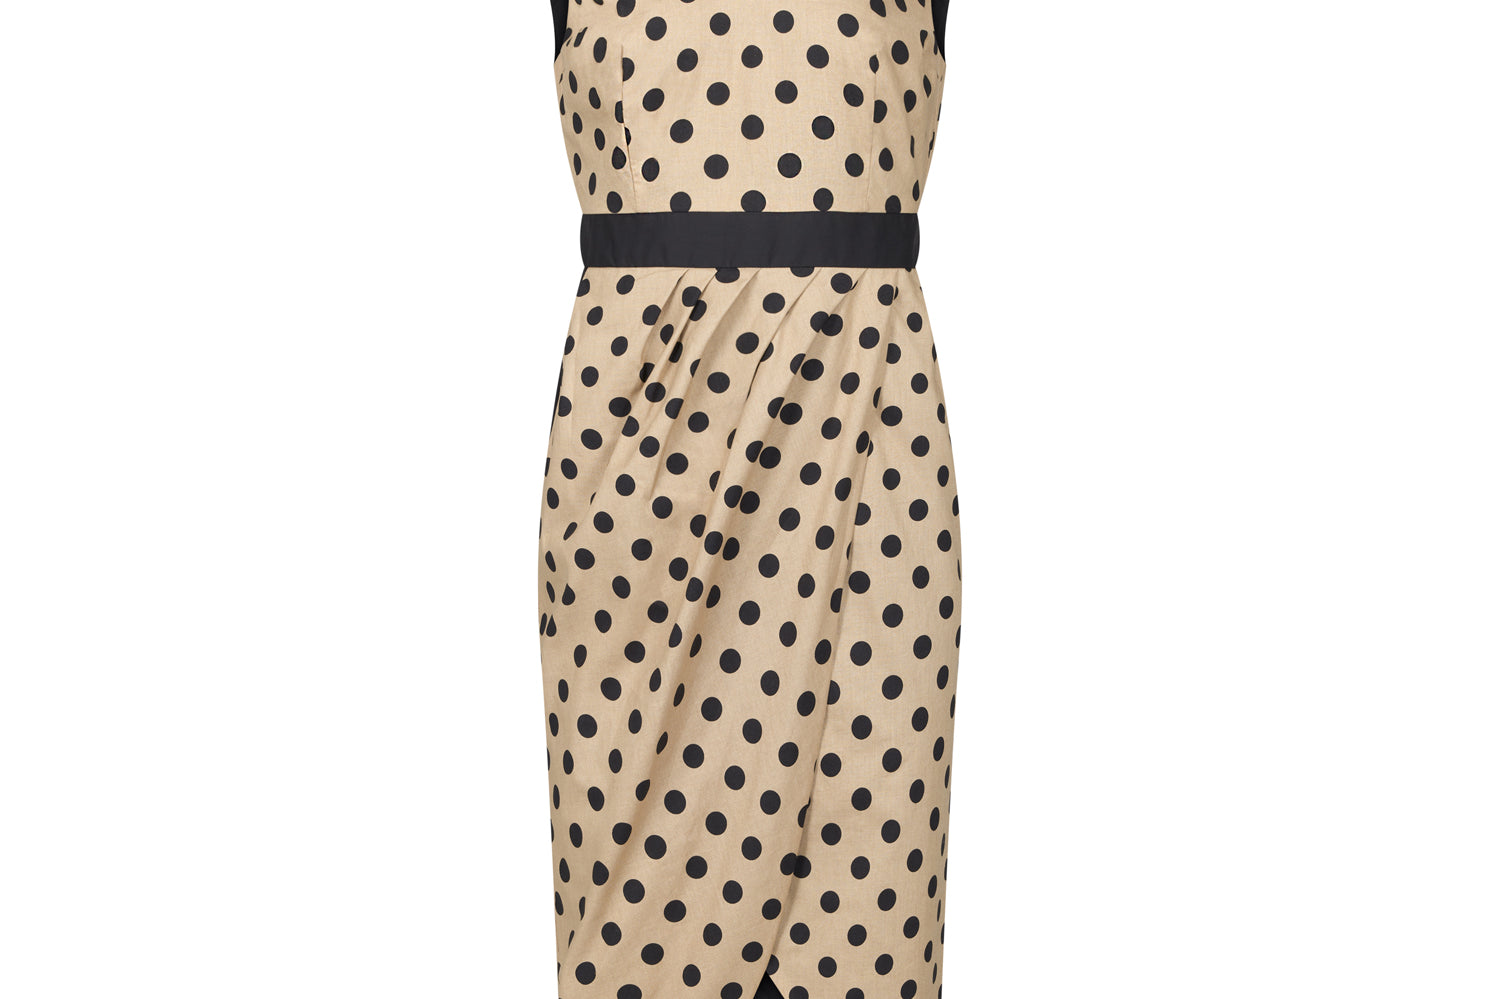 Bessie Beaming Illusion Wrap Dress in Natural and Black Polka Dots